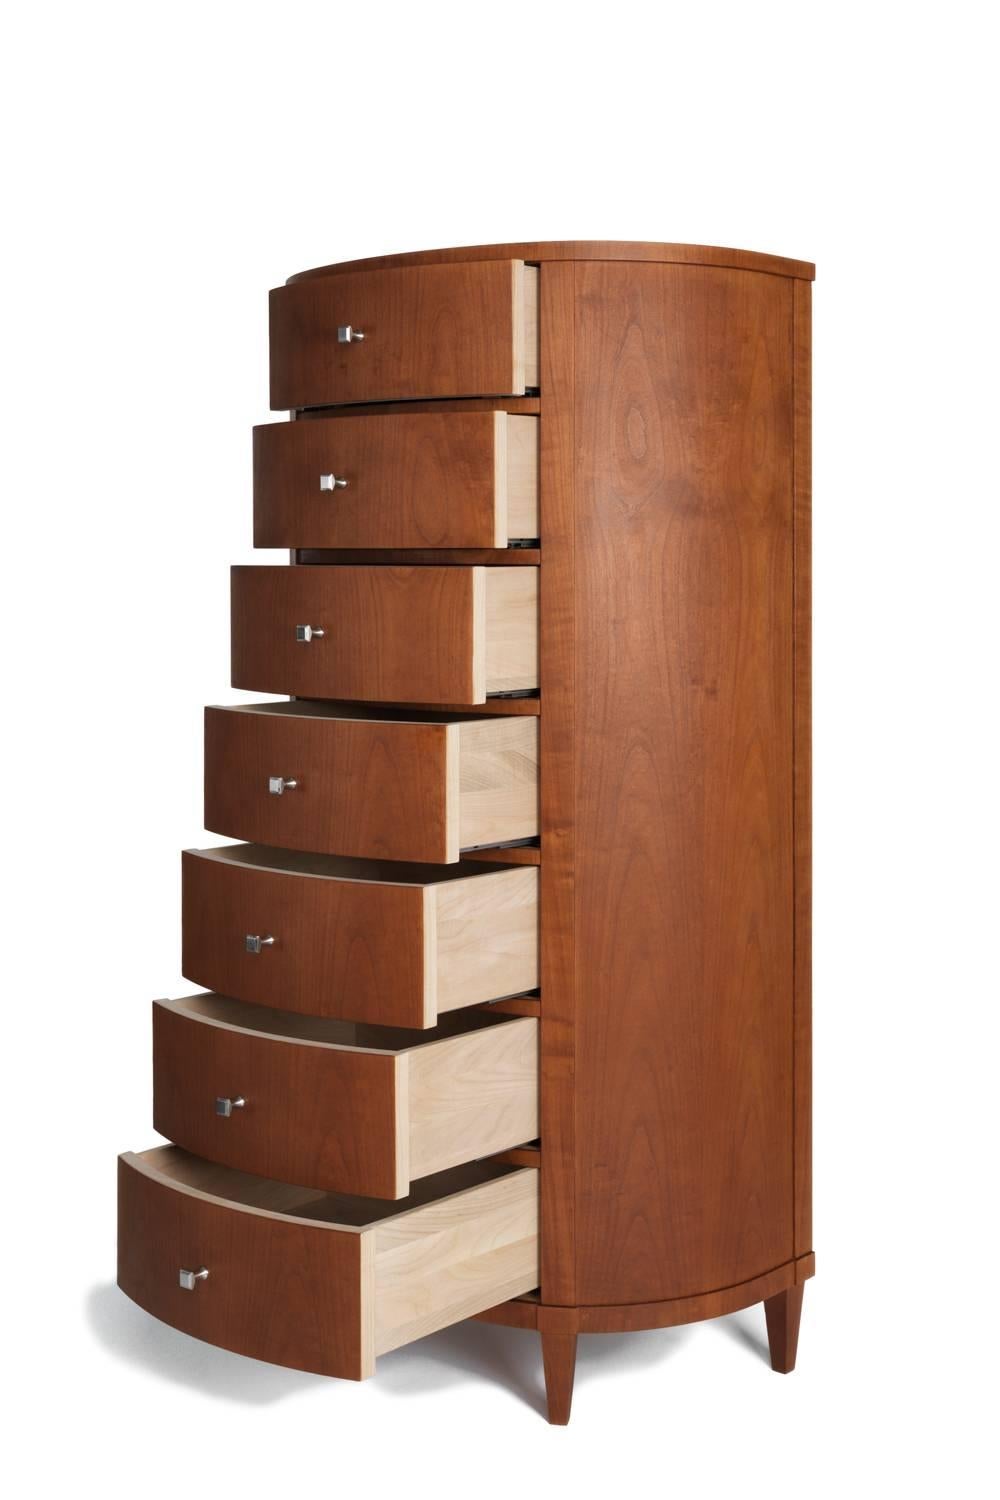 A chest of drawers in the Wellington style. Made using the bent wood technique, seven drawers carried on sliding rails, bookmatch veneered. Silver plated handles (knobs), inside sanded but untreated (not lacquered). Solid wood tapered feet. Stained